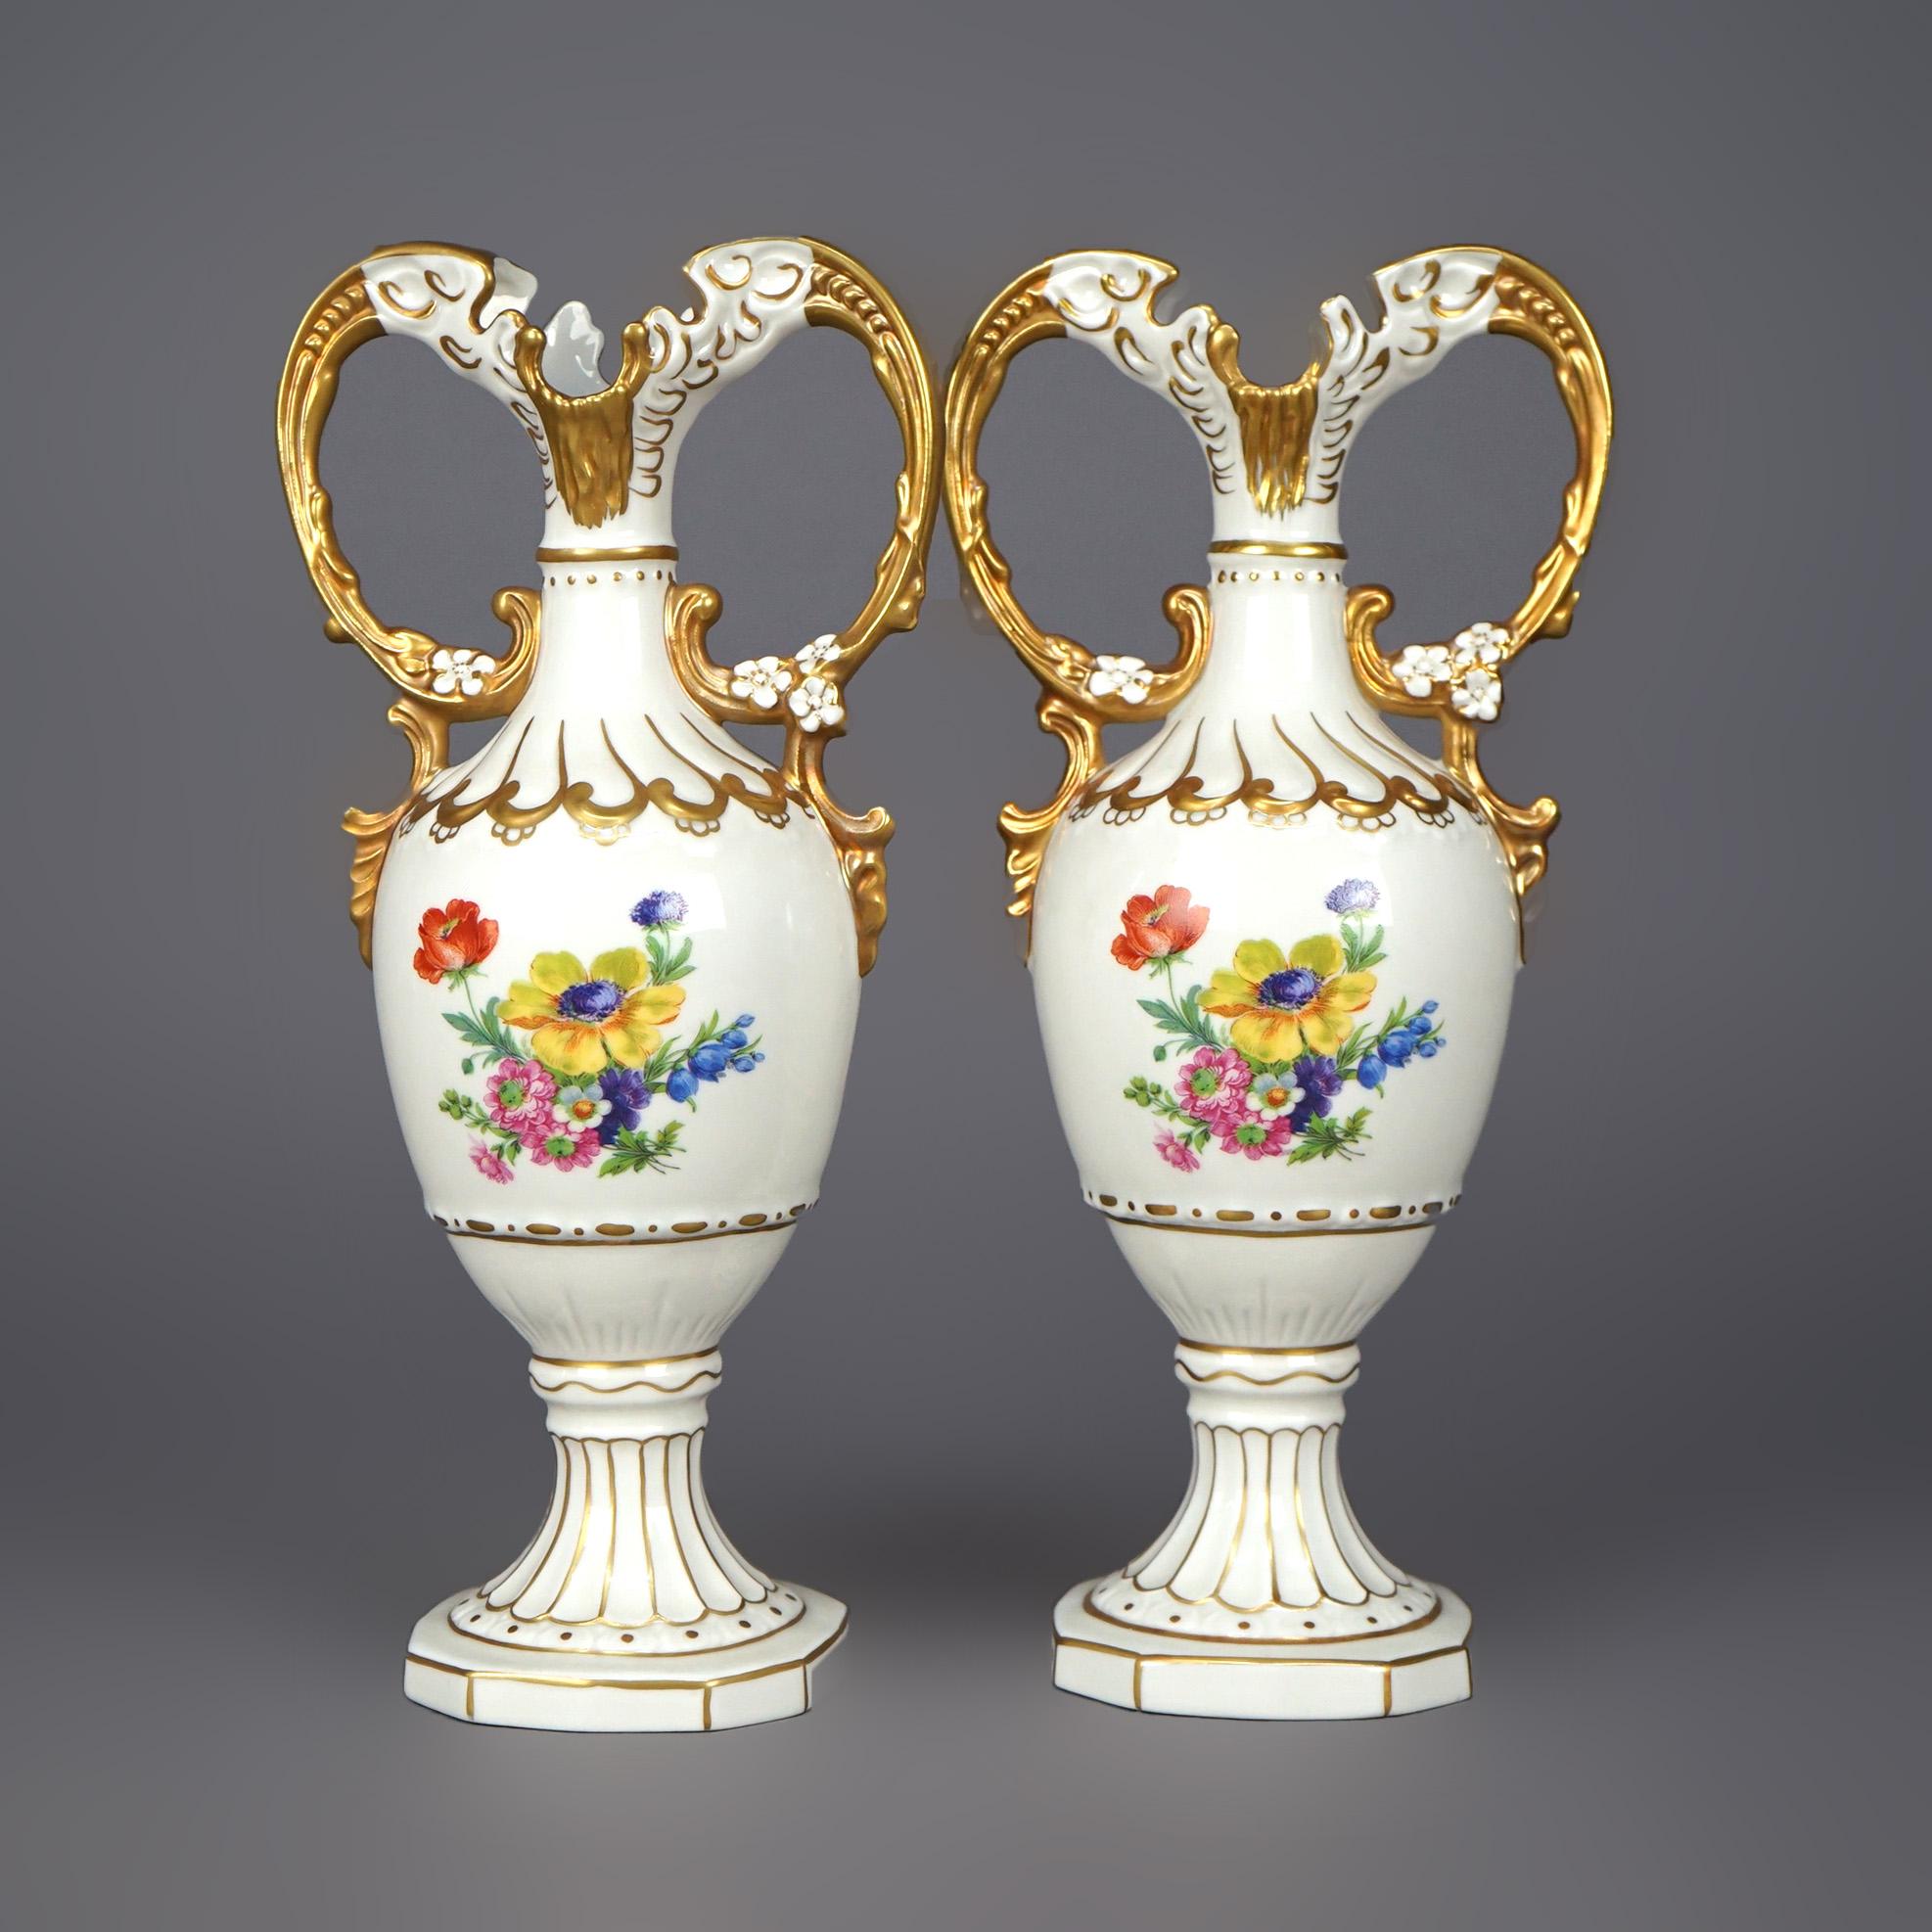 An antique pair of Czech urns offer porcelain construction with double handles, hand painted floral decoration and gilt highlights throughout, stamped on base as photographed, c1940.

Measures- 11.25''H x 5.5''W x 3.5''D.